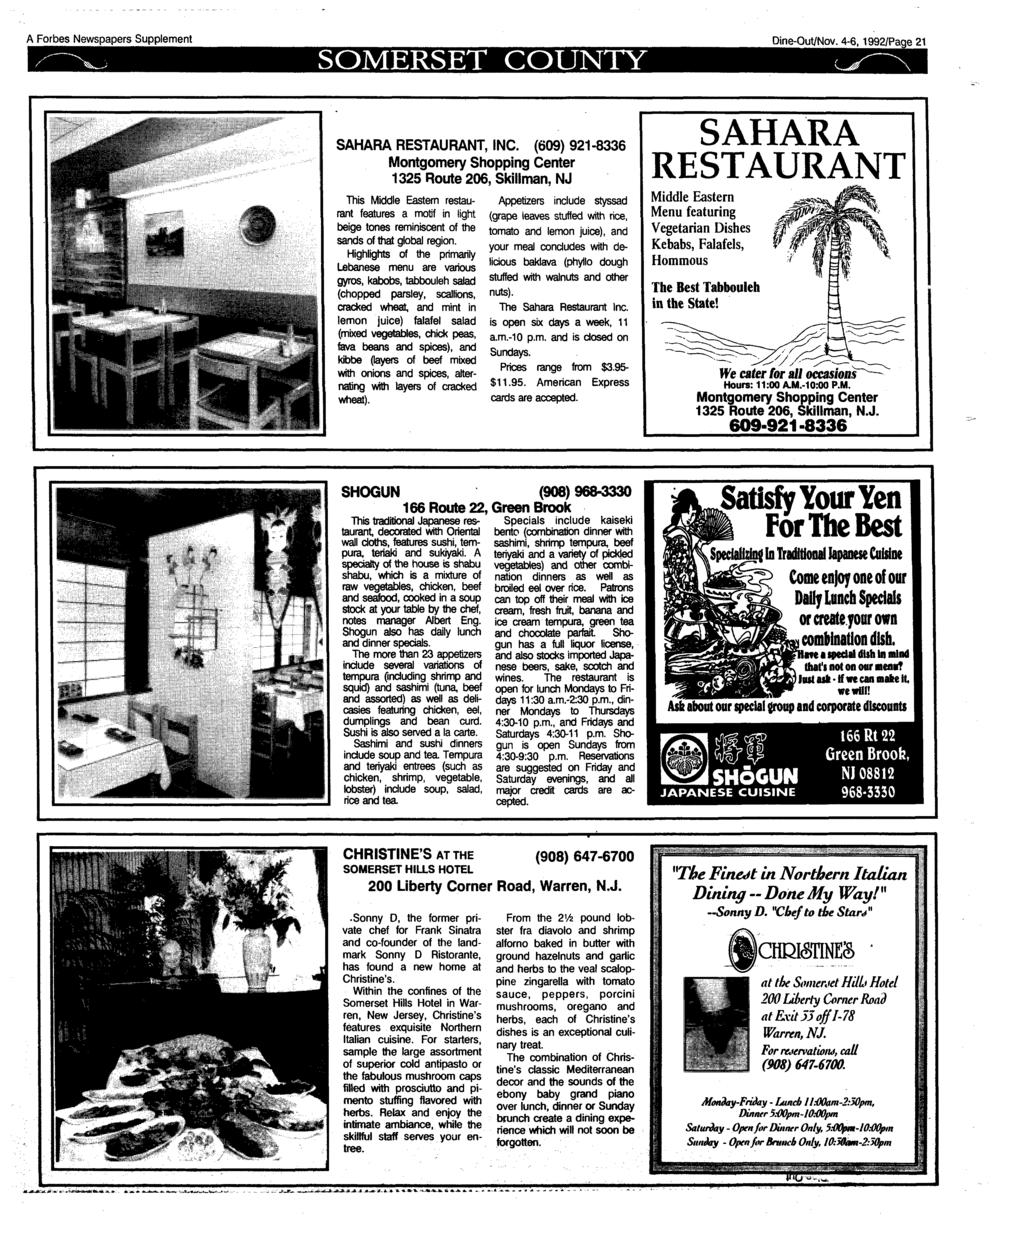 A Forbes Newspapers Supplement SOMERSET COUNTY Dine-Out/Nov. 4-6,1992/Page 21 SAHARA RESTAURANT, INC.